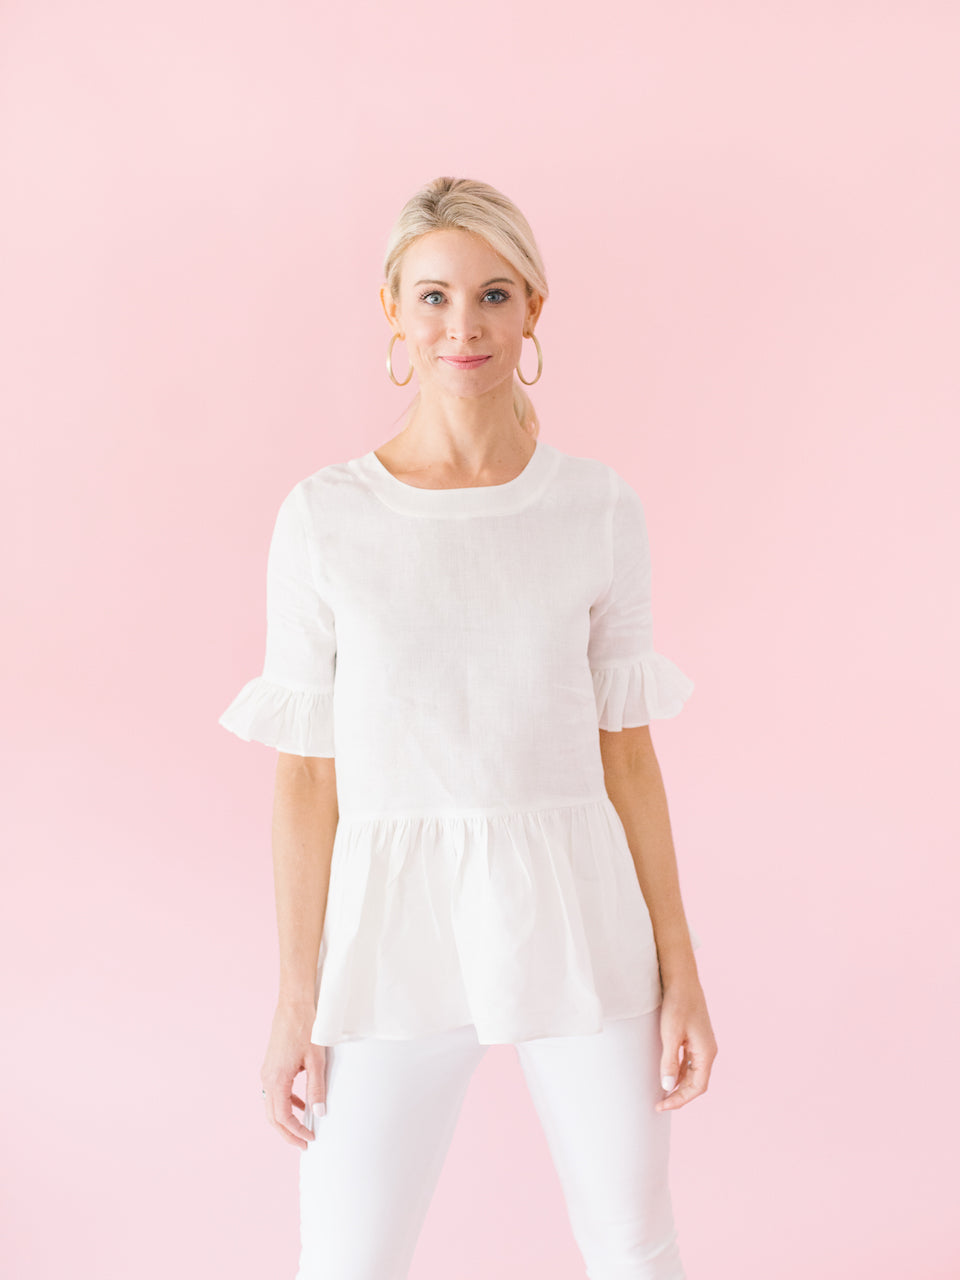 Whimsical, bold, playful clothes for women - Shop LaRoque